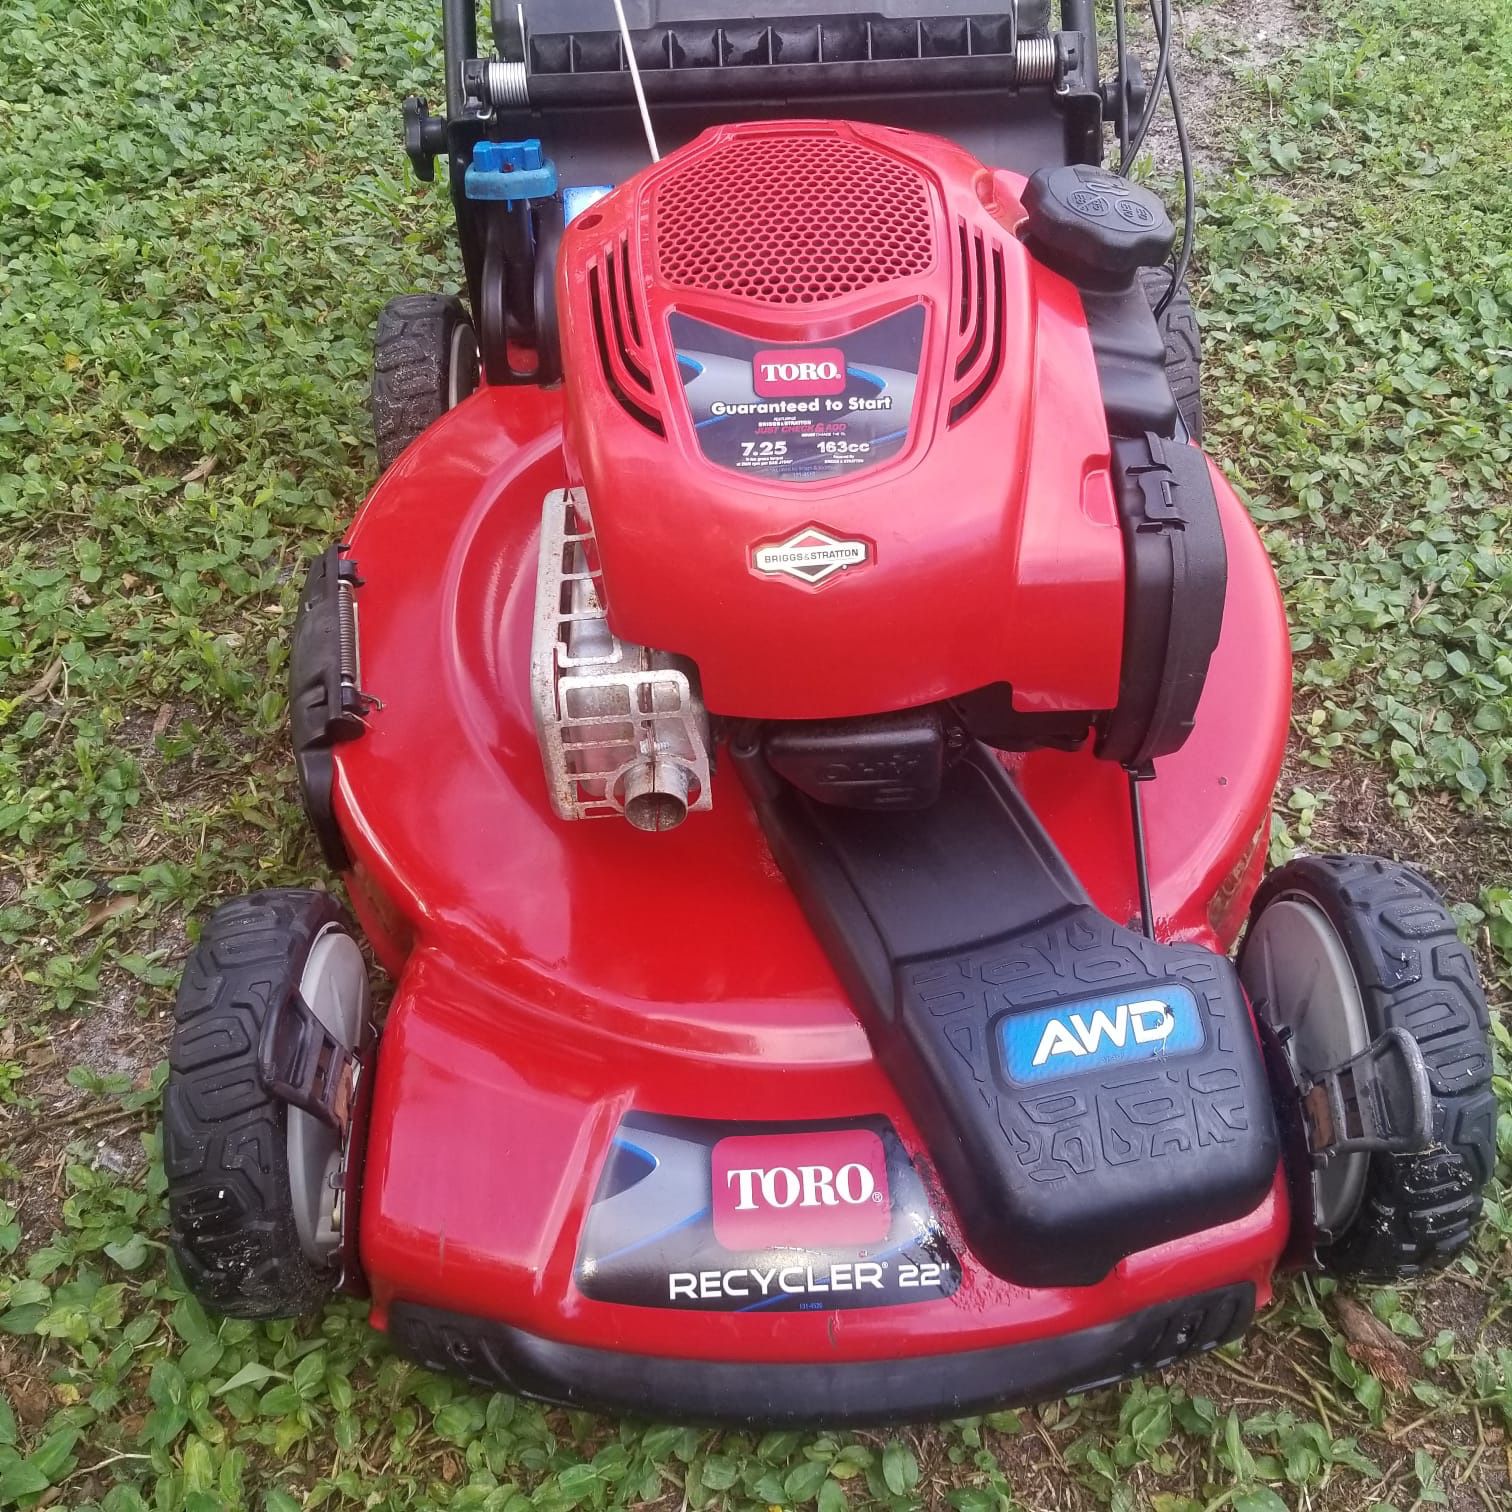 Toro lawn mower self propelled with bag in good condition runs great no rust no issues